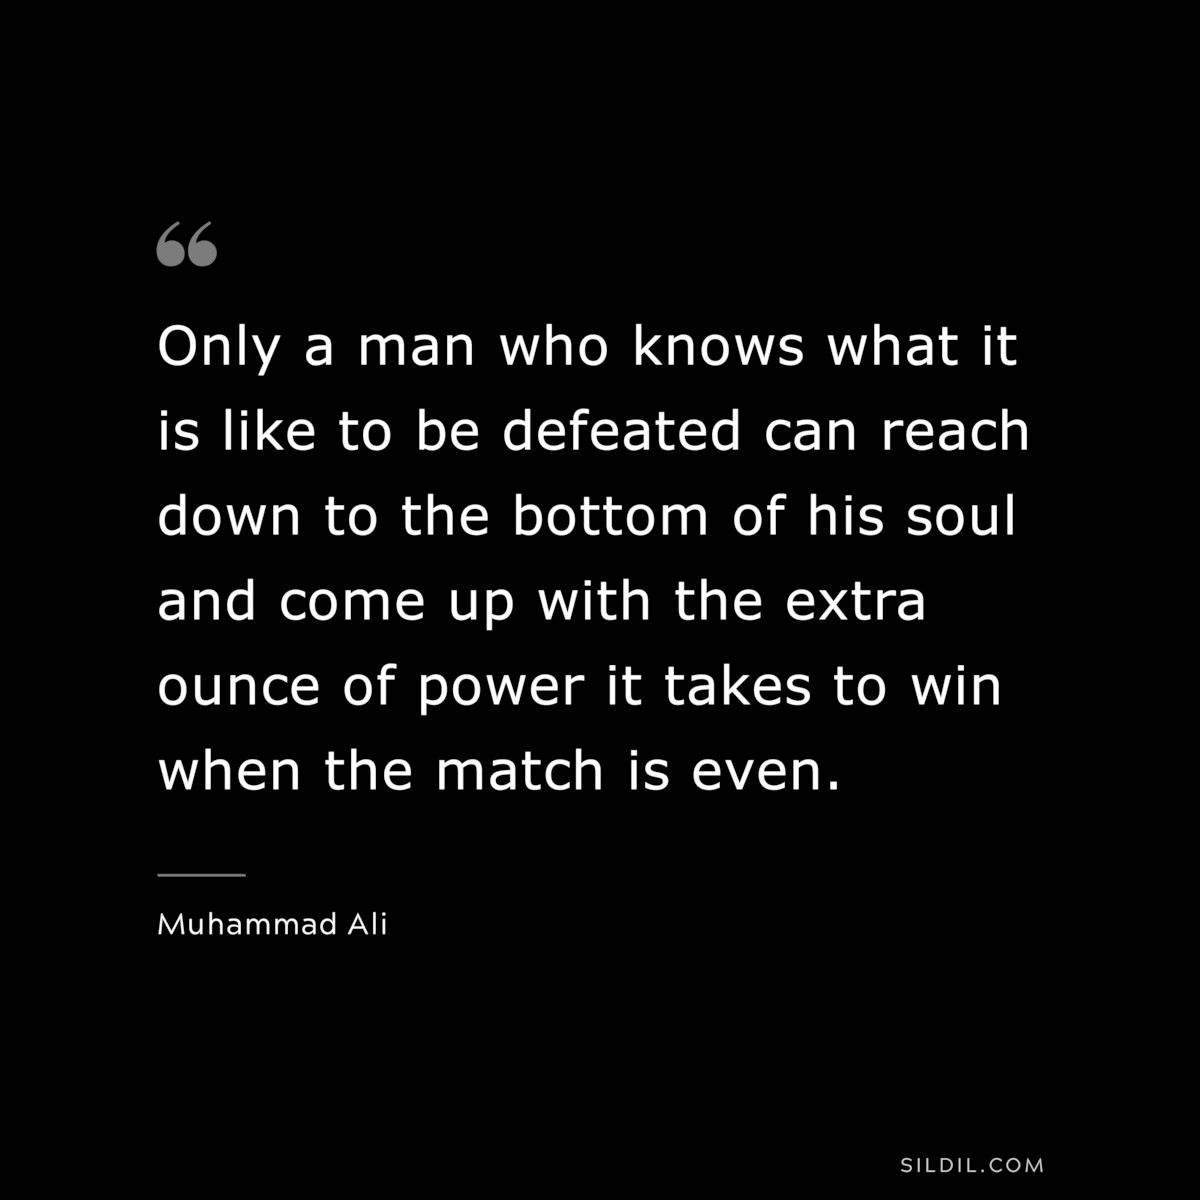 Only a man who knows what it is like to be defeated can reach down to the bottom of his soul and come up with the extra ounce of power it takes to win when the match is even. ― Muhammad Ali